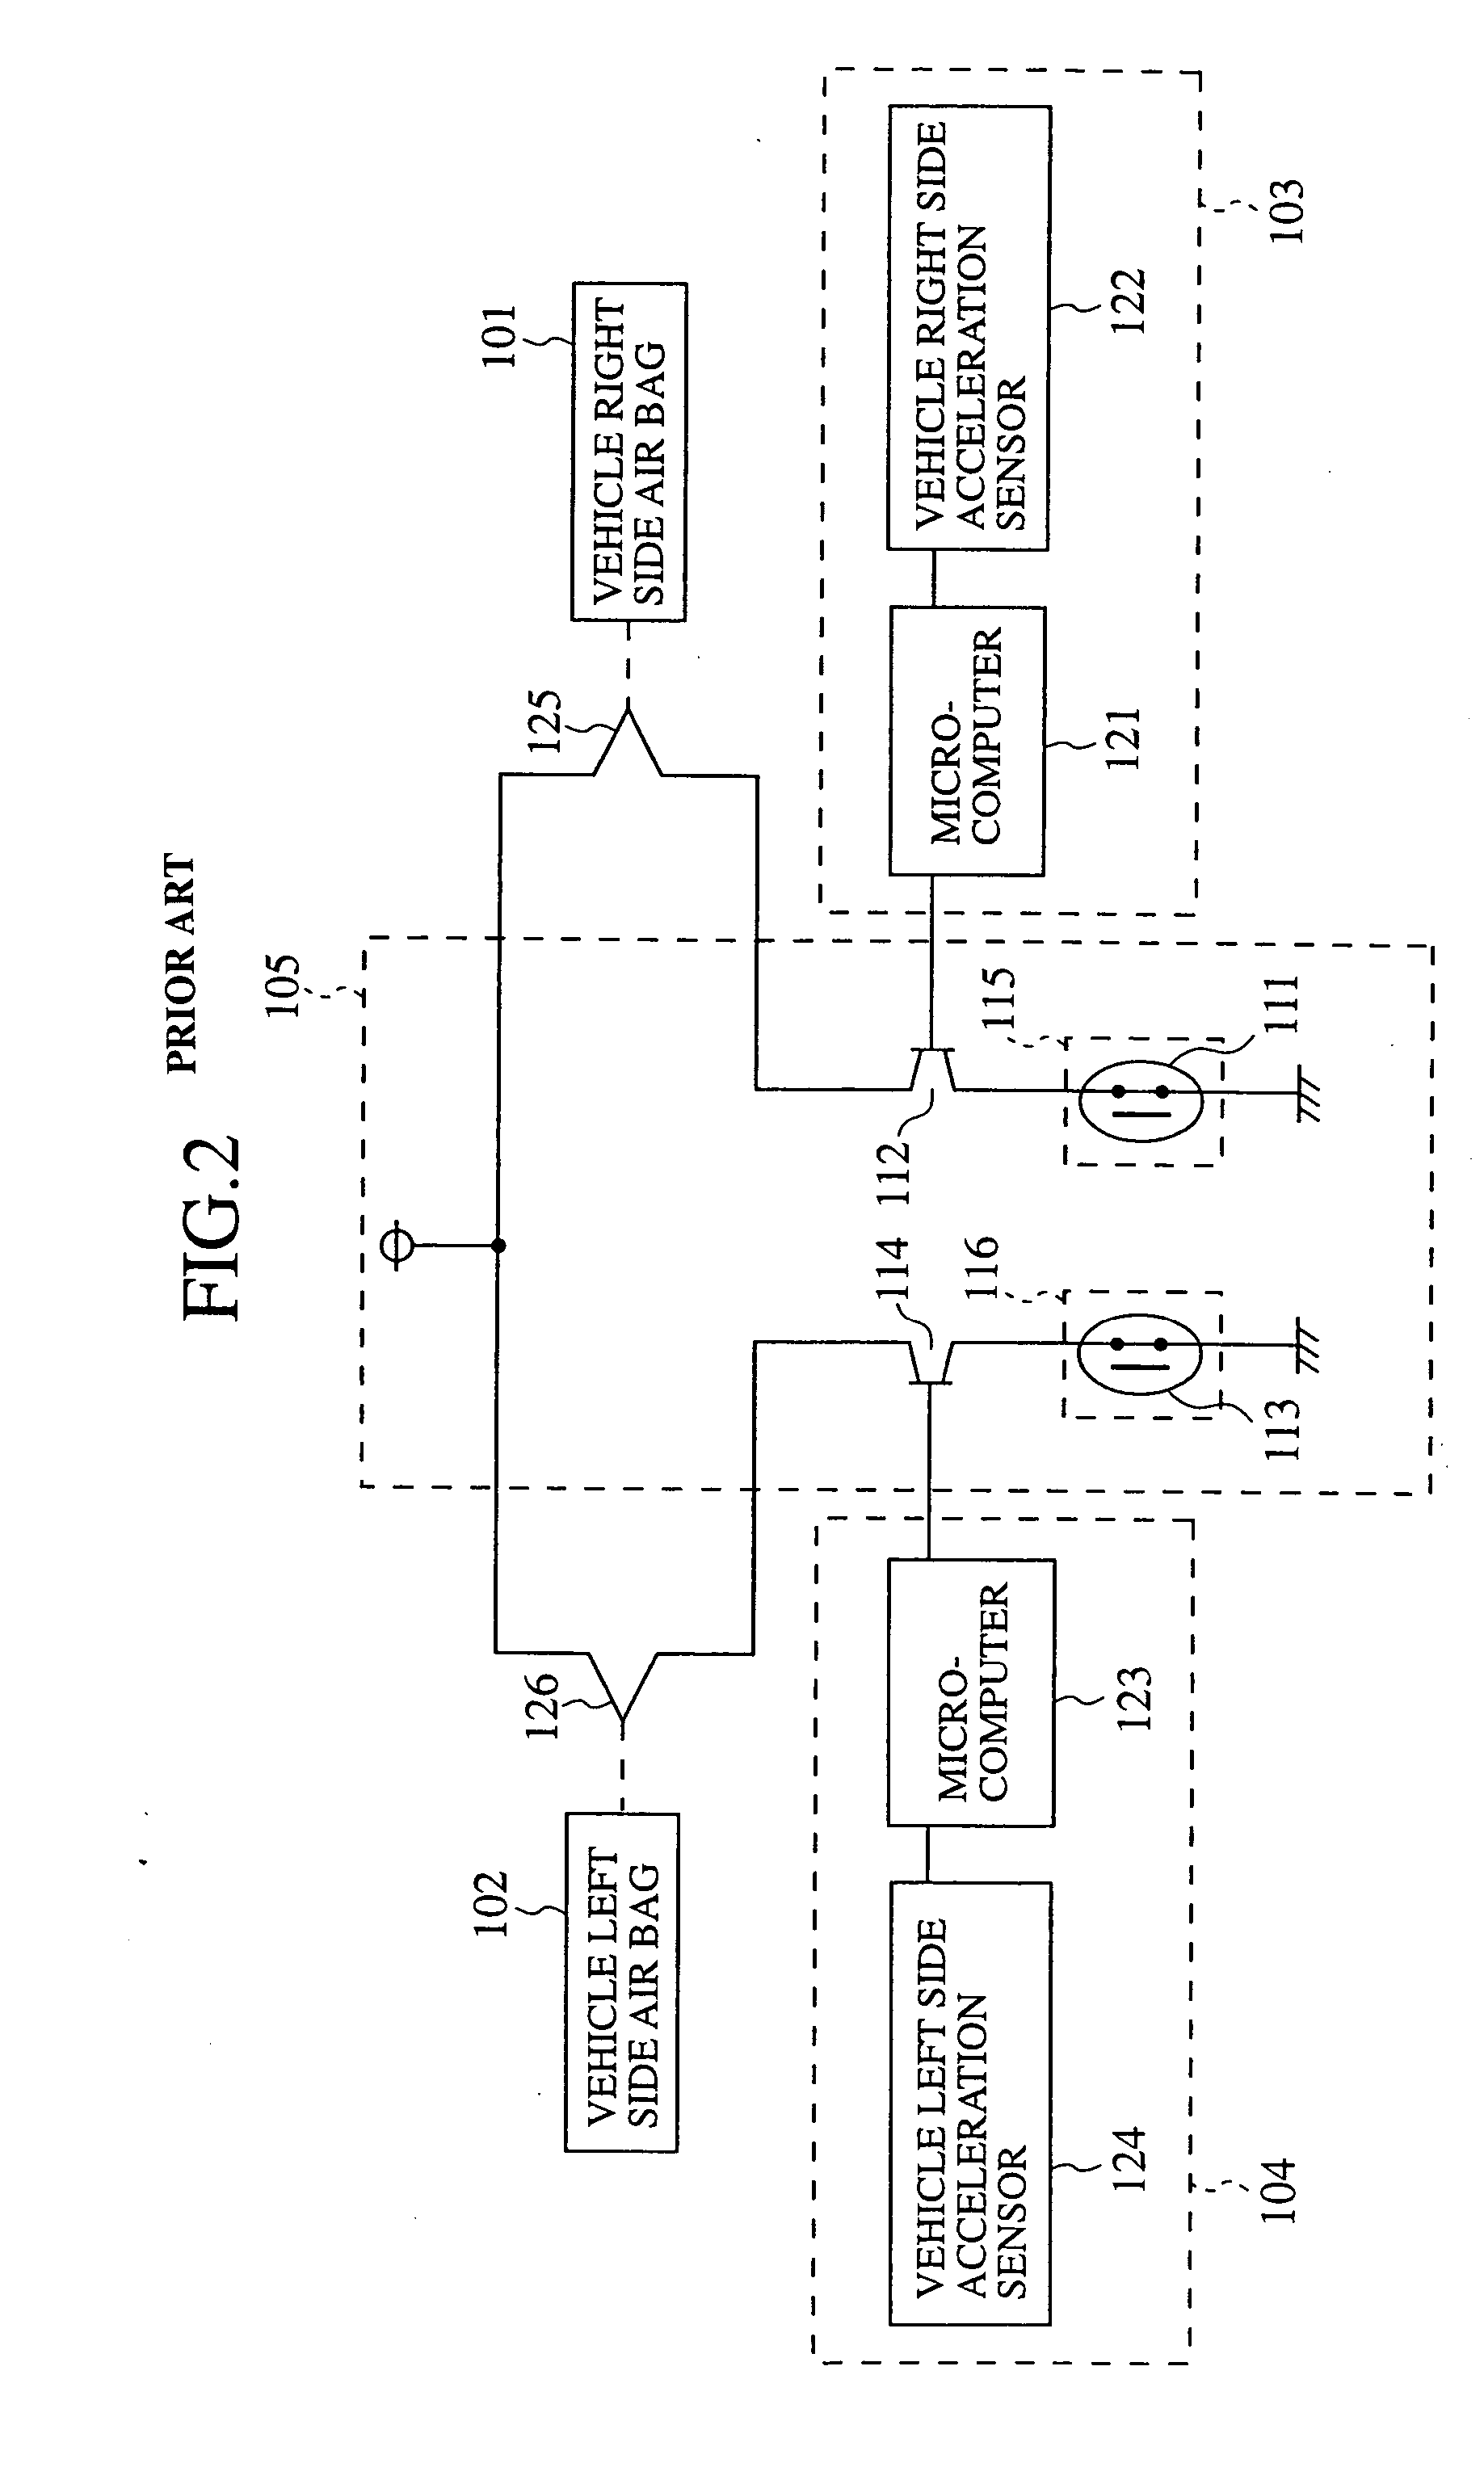 Acceleration detector and passive safety device